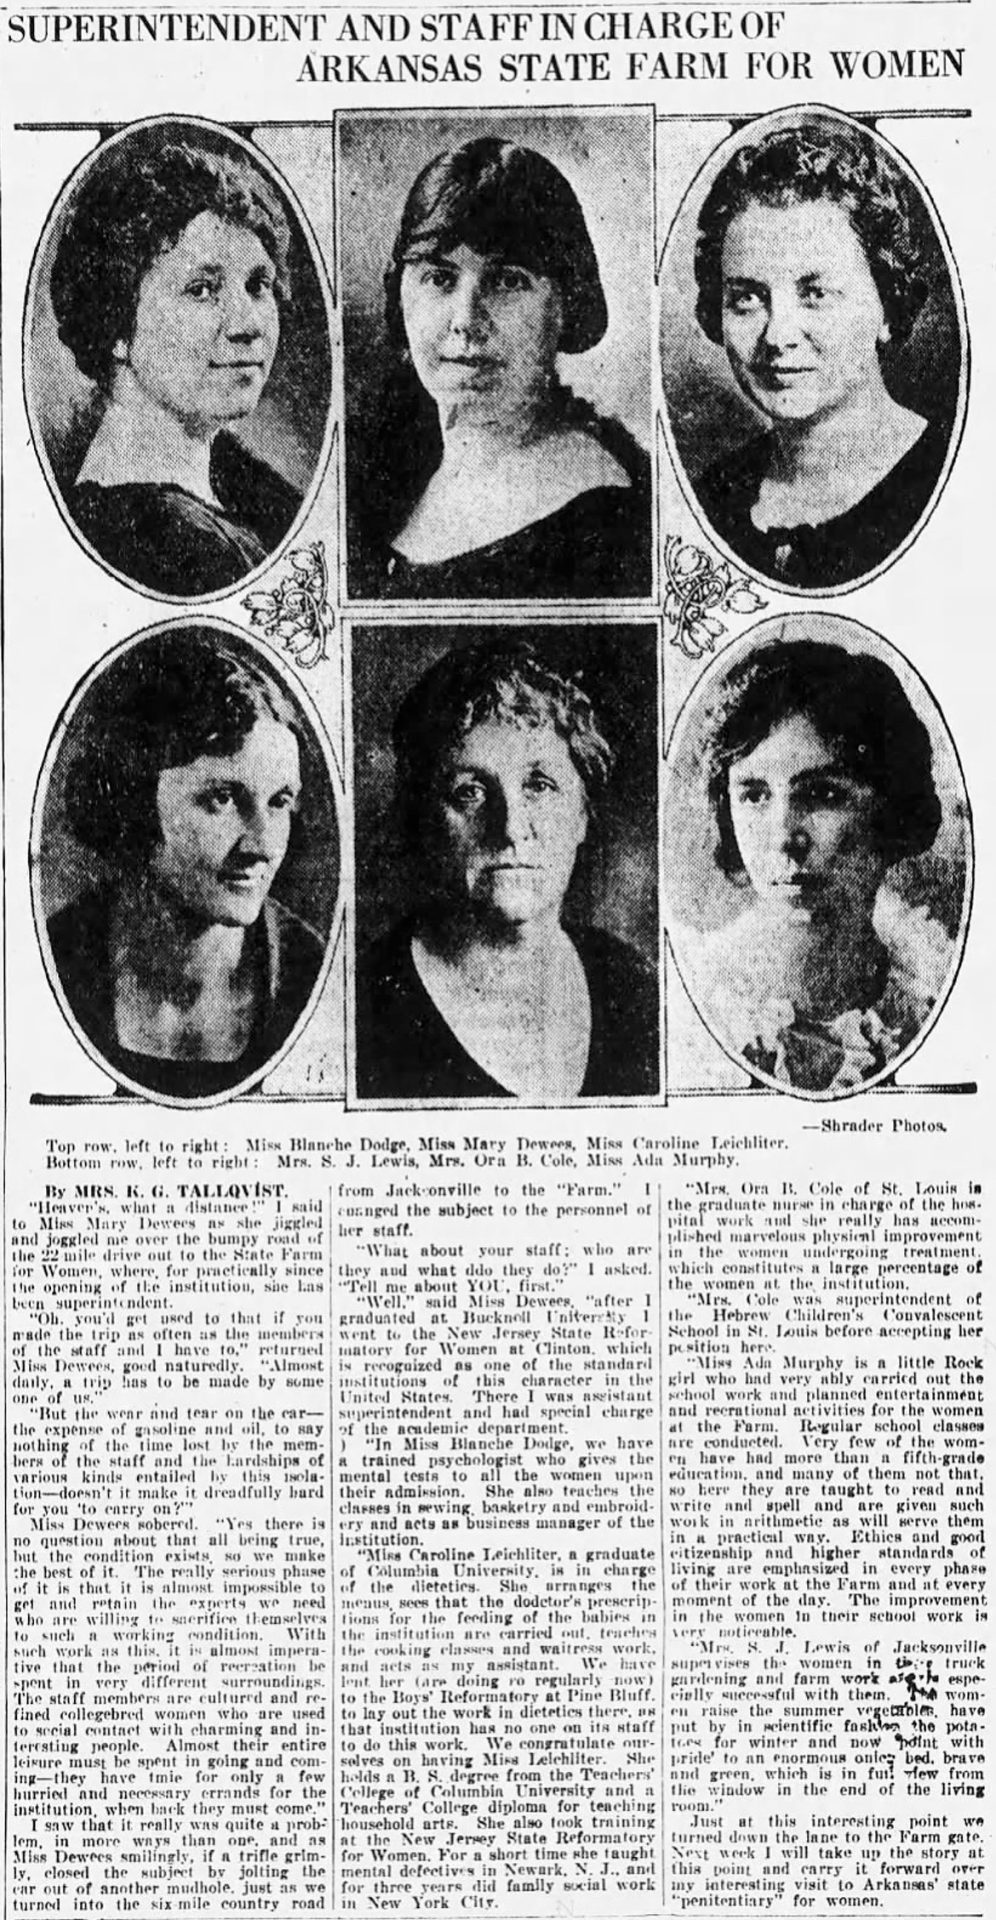 Portraits of six white women in newspaper with article text